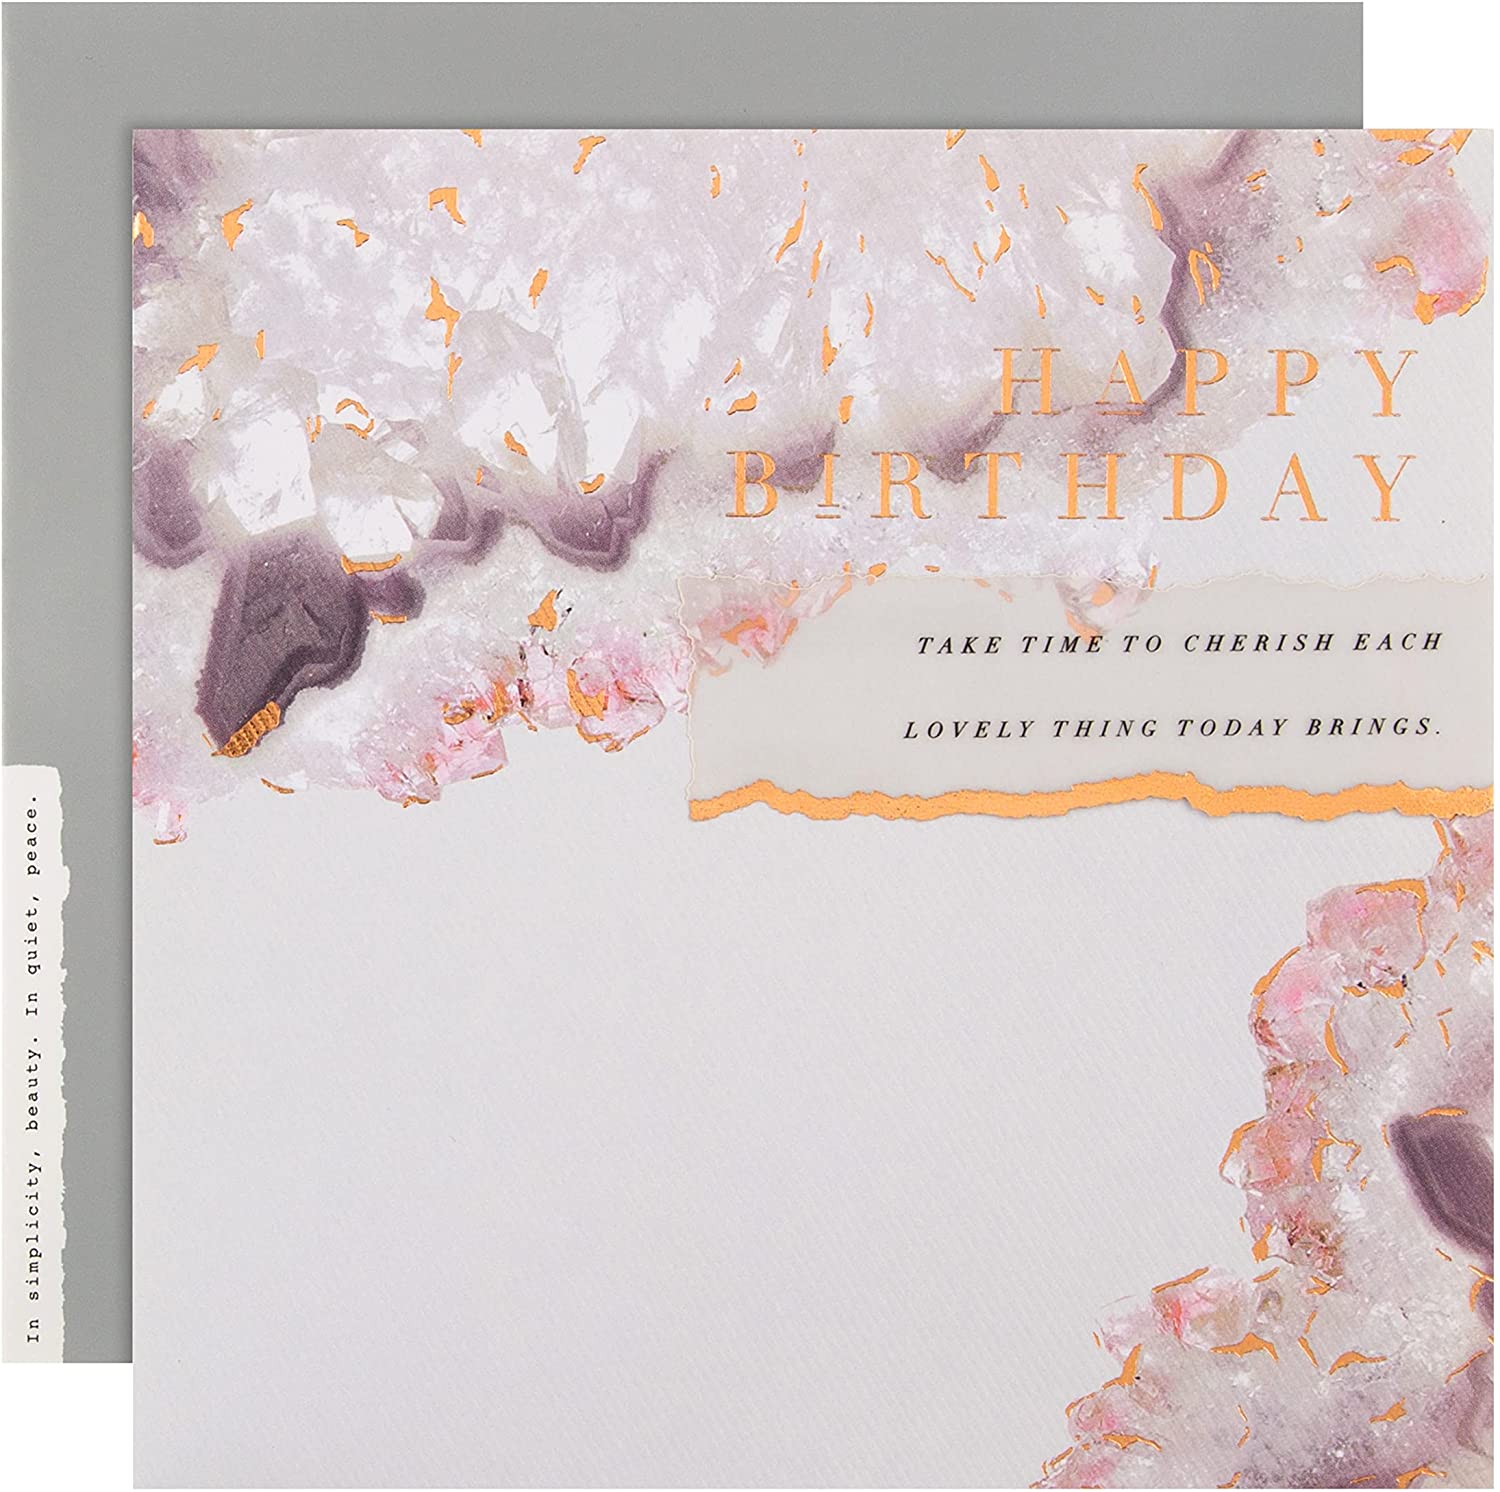 Hallmark Birthday Card ''Take Time To Cherish Each Lovely Thing Today Brings'' RRP £3.39 CLEARANCE XL £1.99